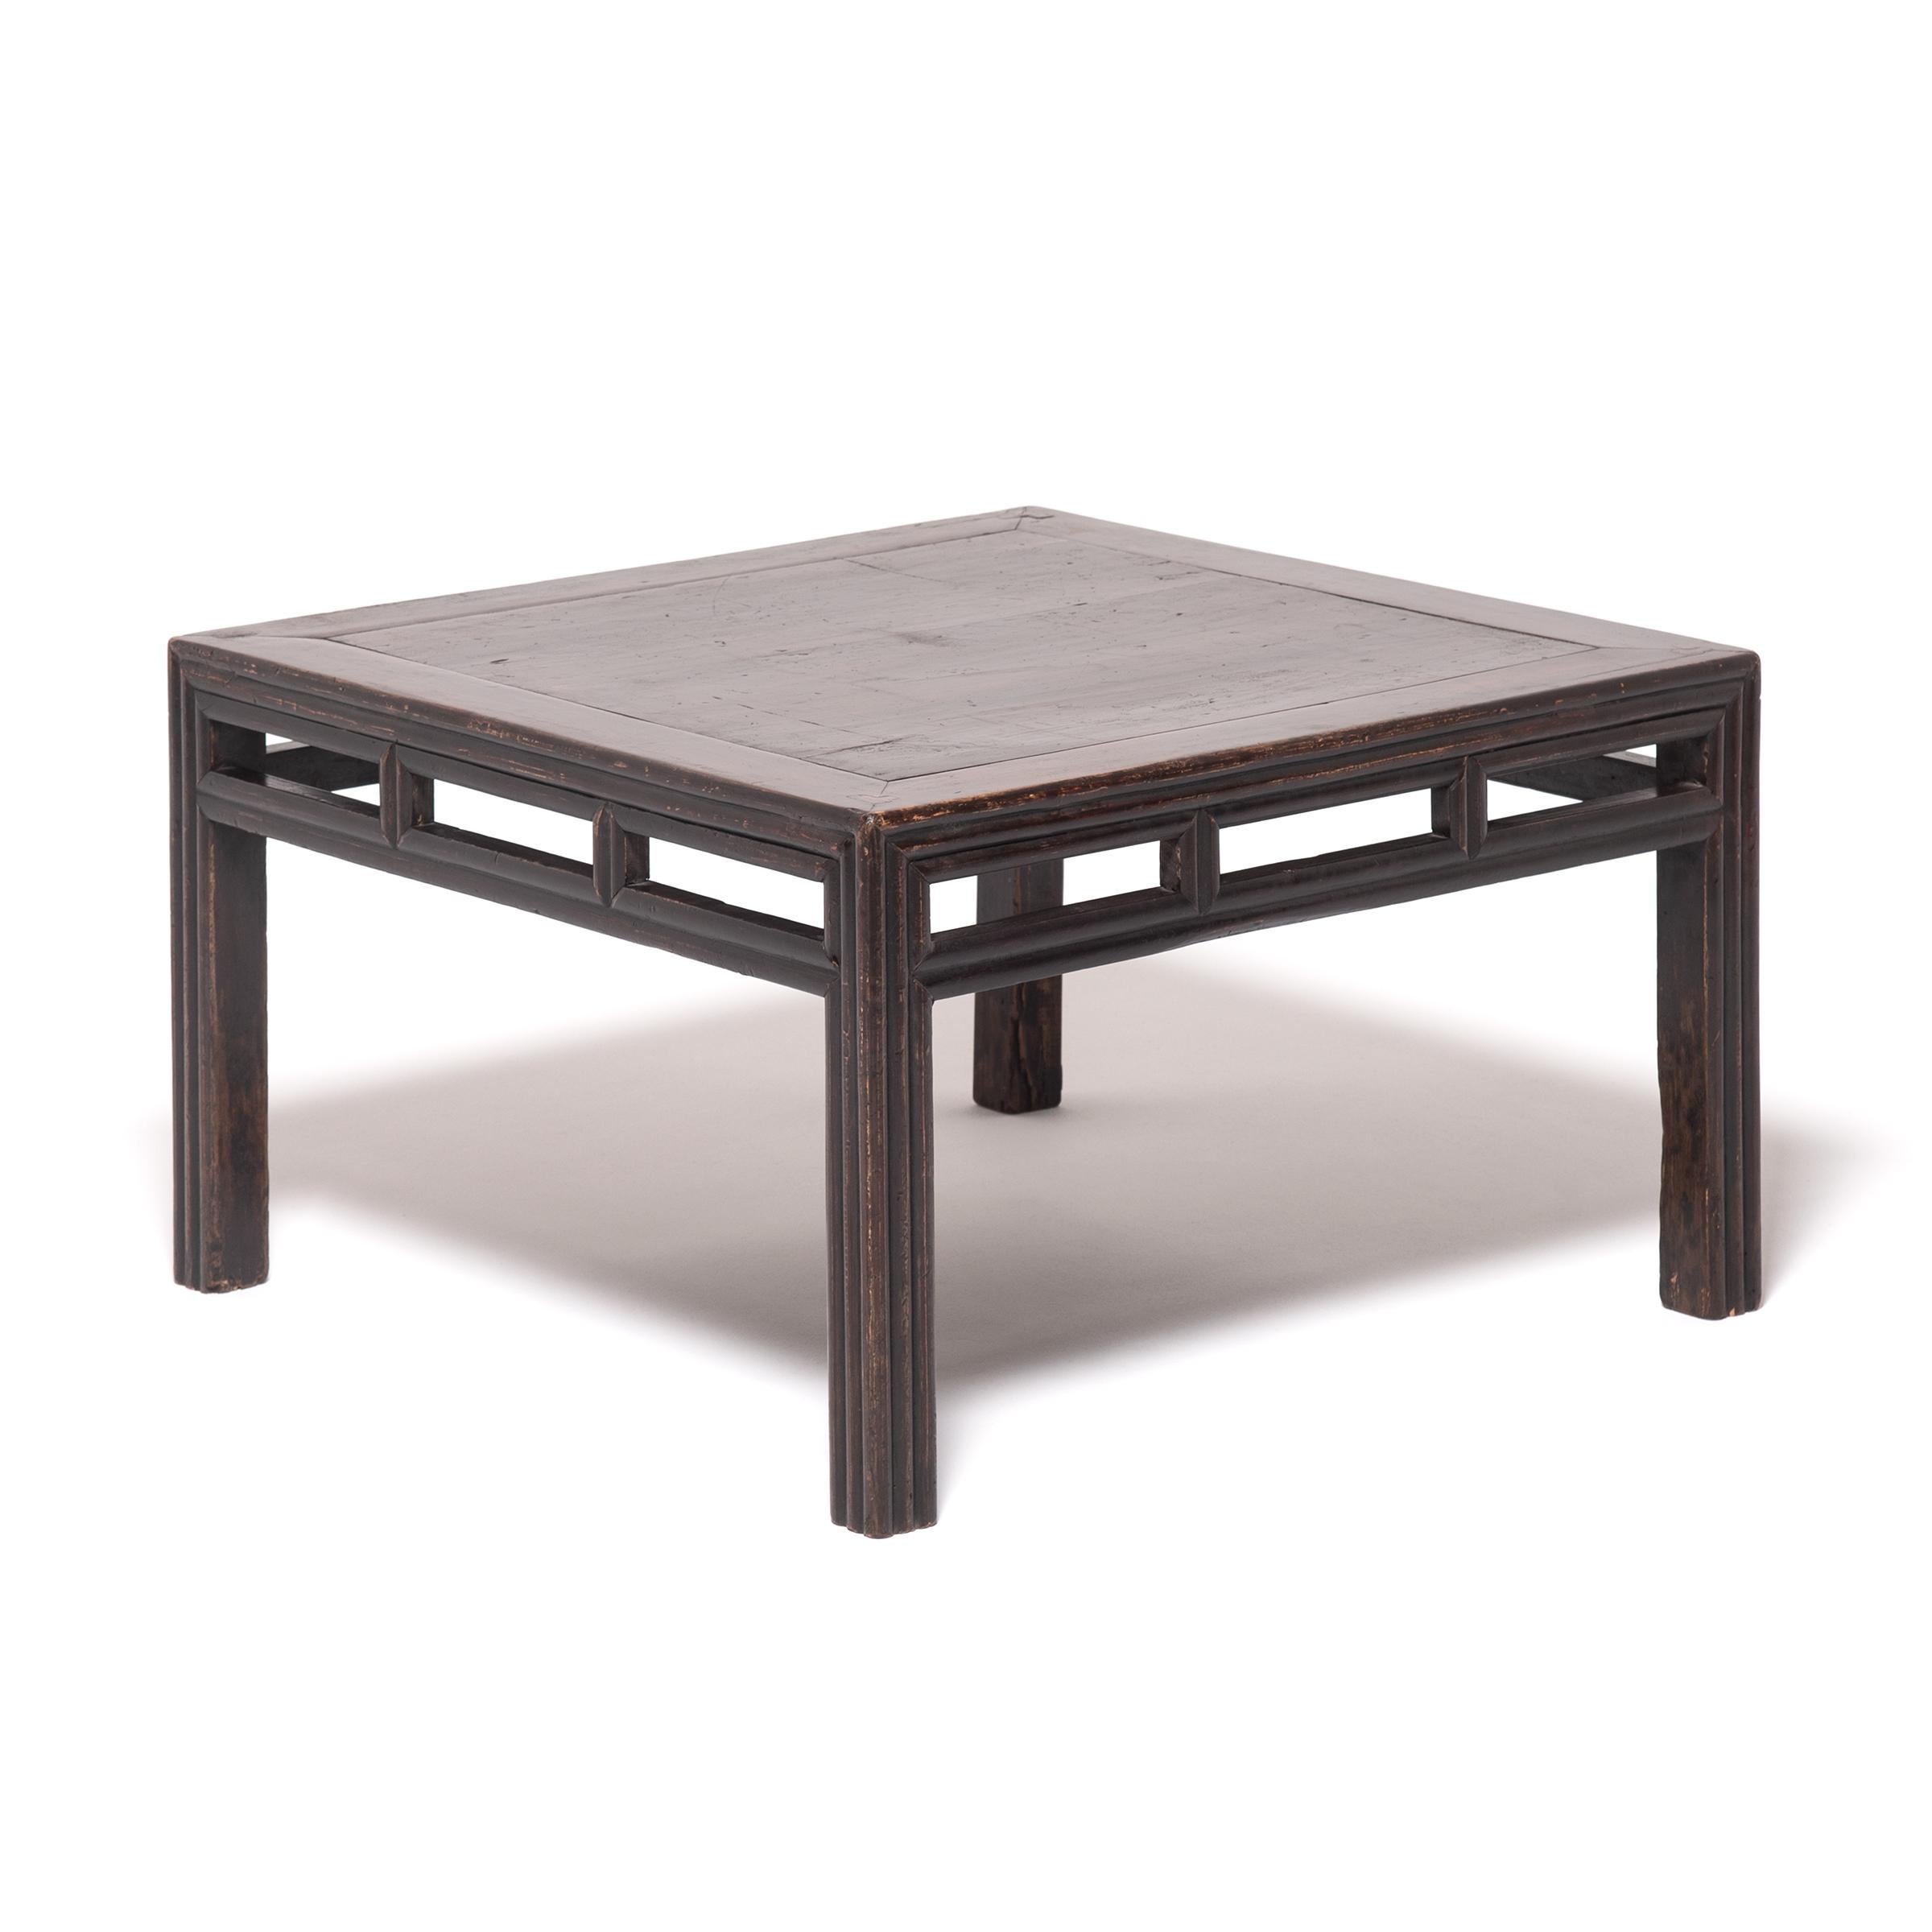 Qing Low Chinese Square Table with Ridged Sides, c. 1900 For Sale